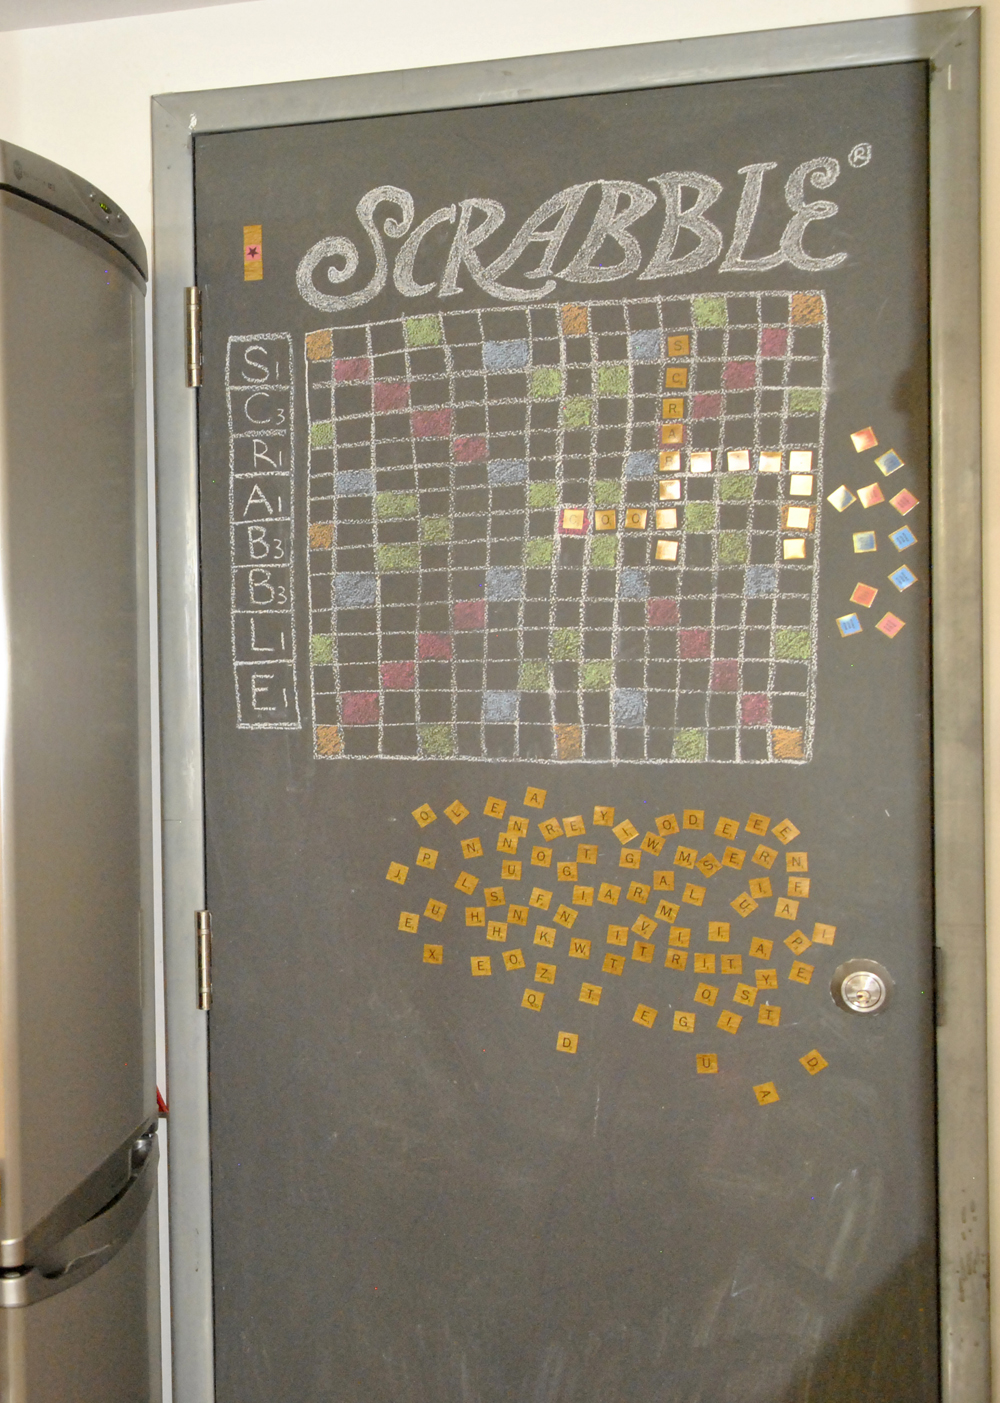 A door in basement kitchen that is painted with chalkboard paint and contains an illustrated Scrabble board